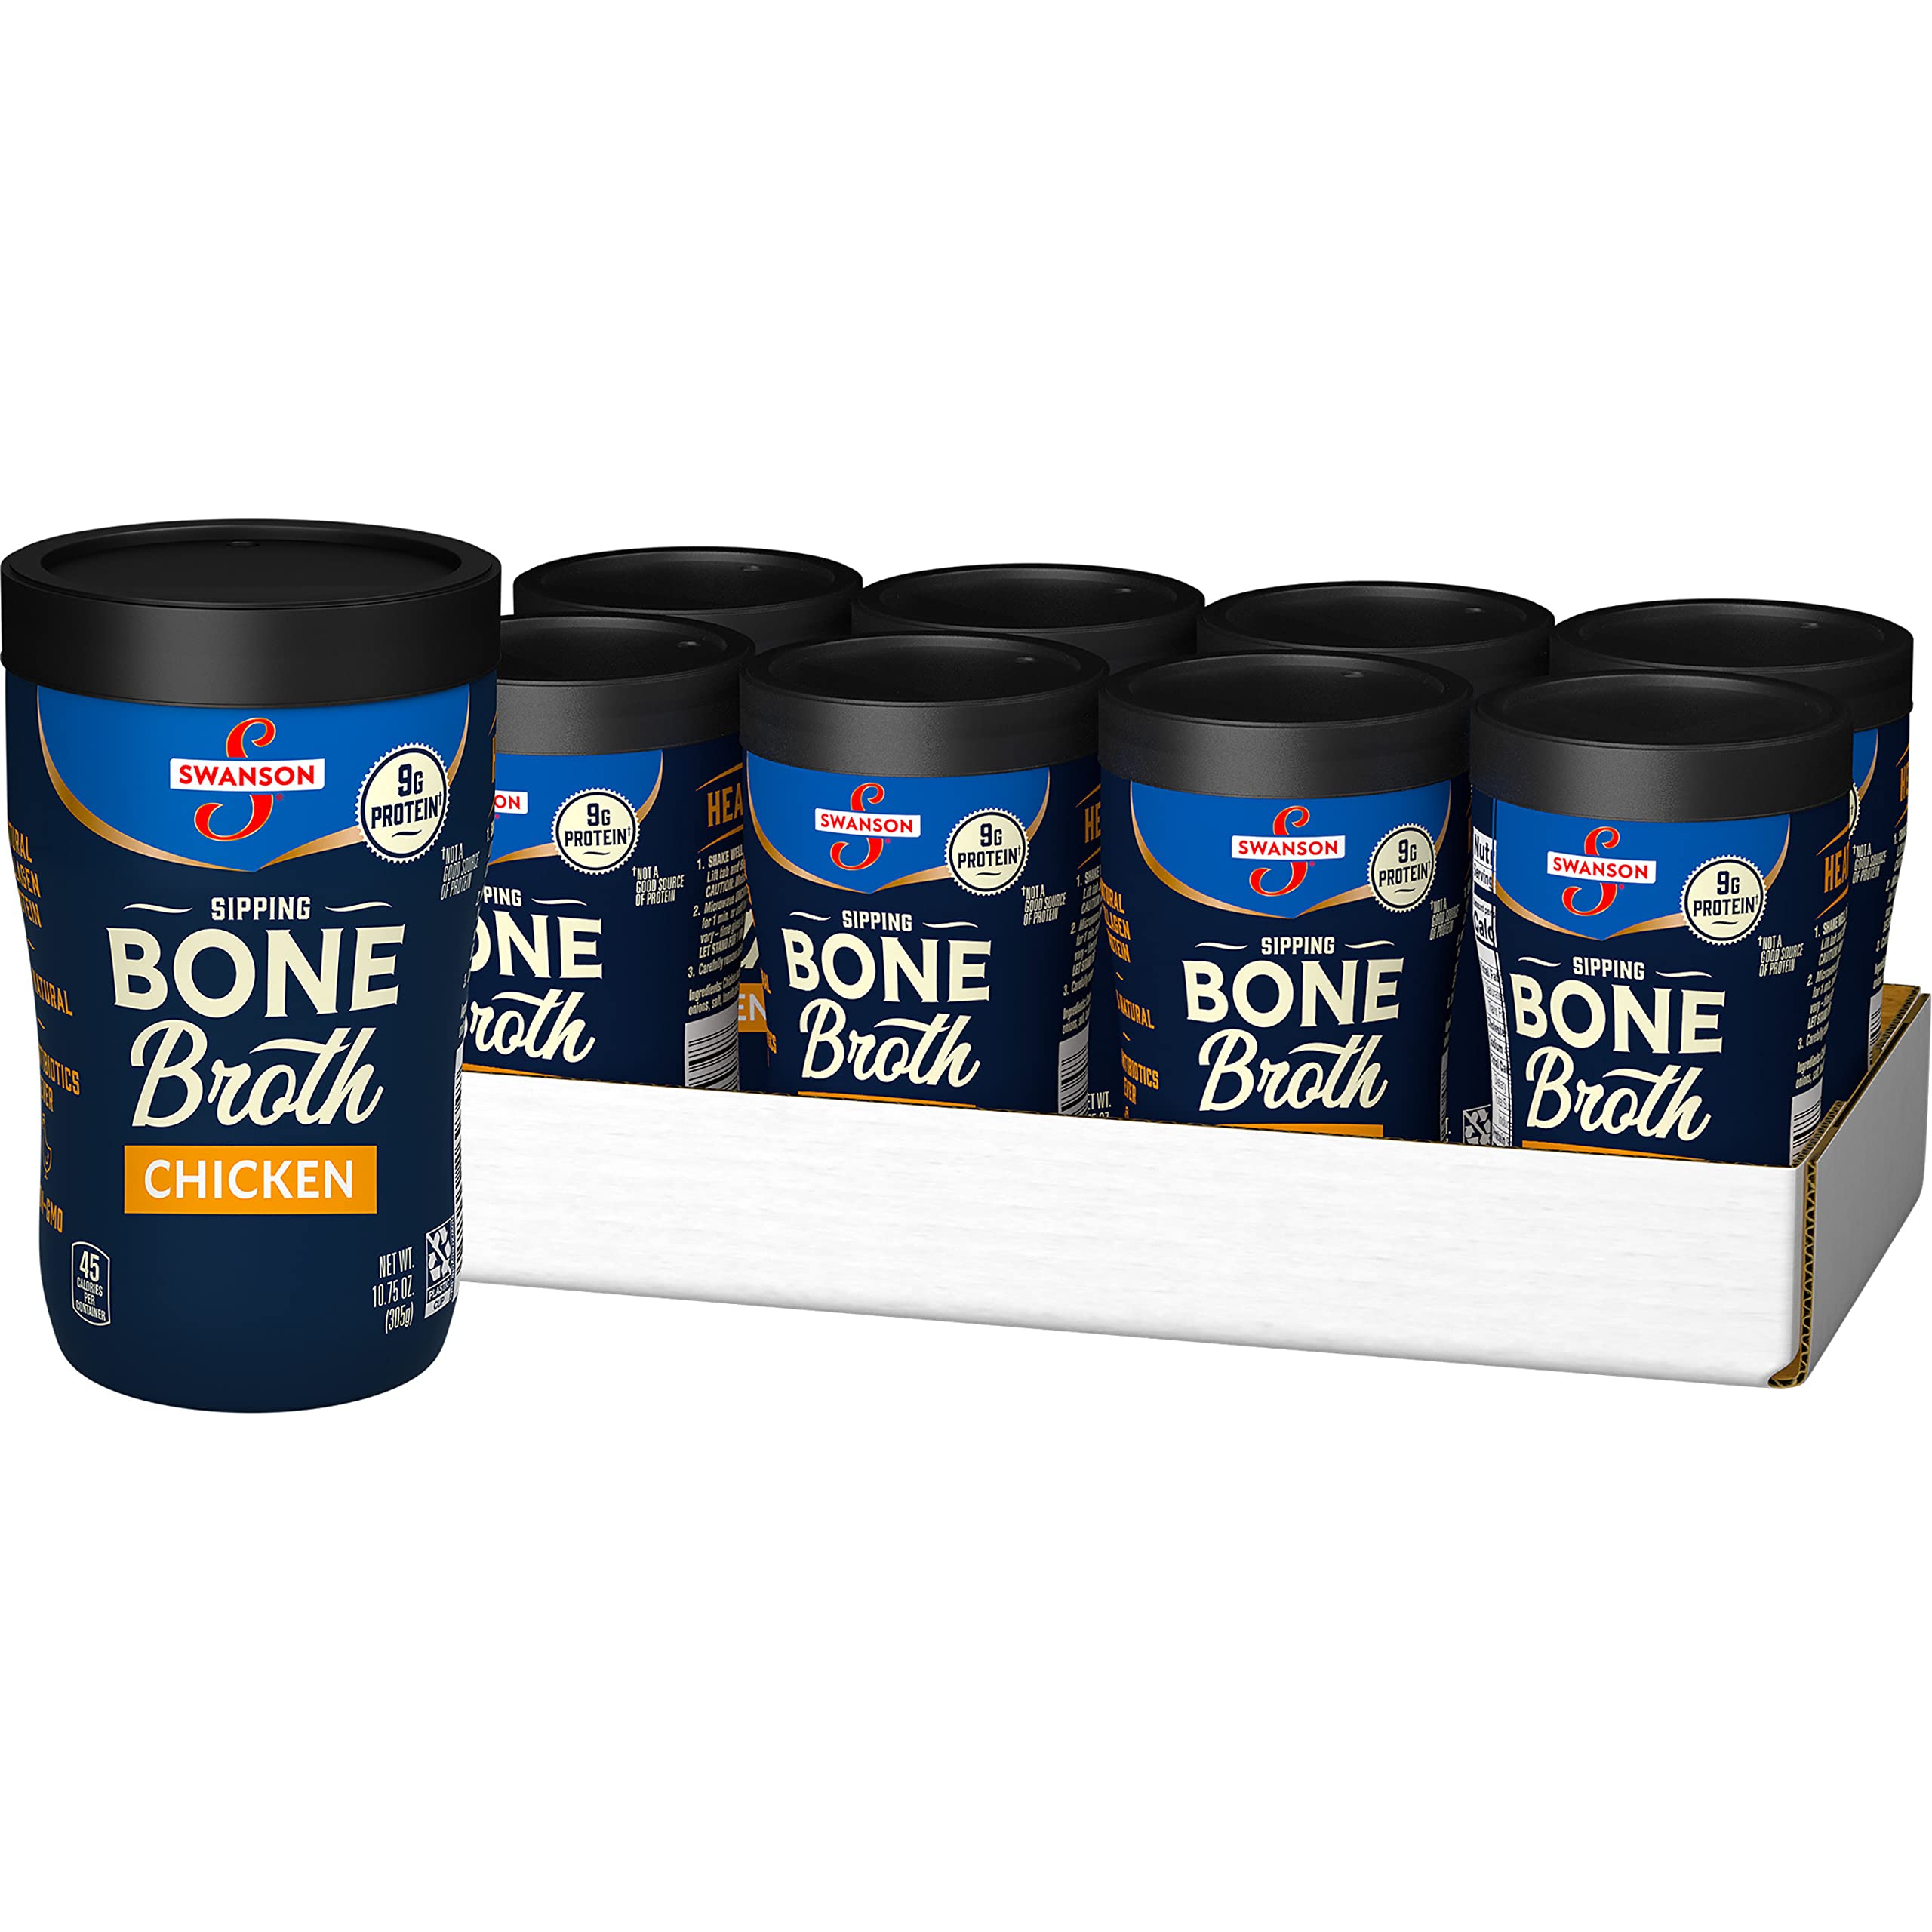 8-Pack 10.75-Ounce Swanson Sipping Bone Broth (Chicken Bone Broth) $11.25 ($1.41 Each) w/ S&S + Free Shipping w/ Prime or on $35+